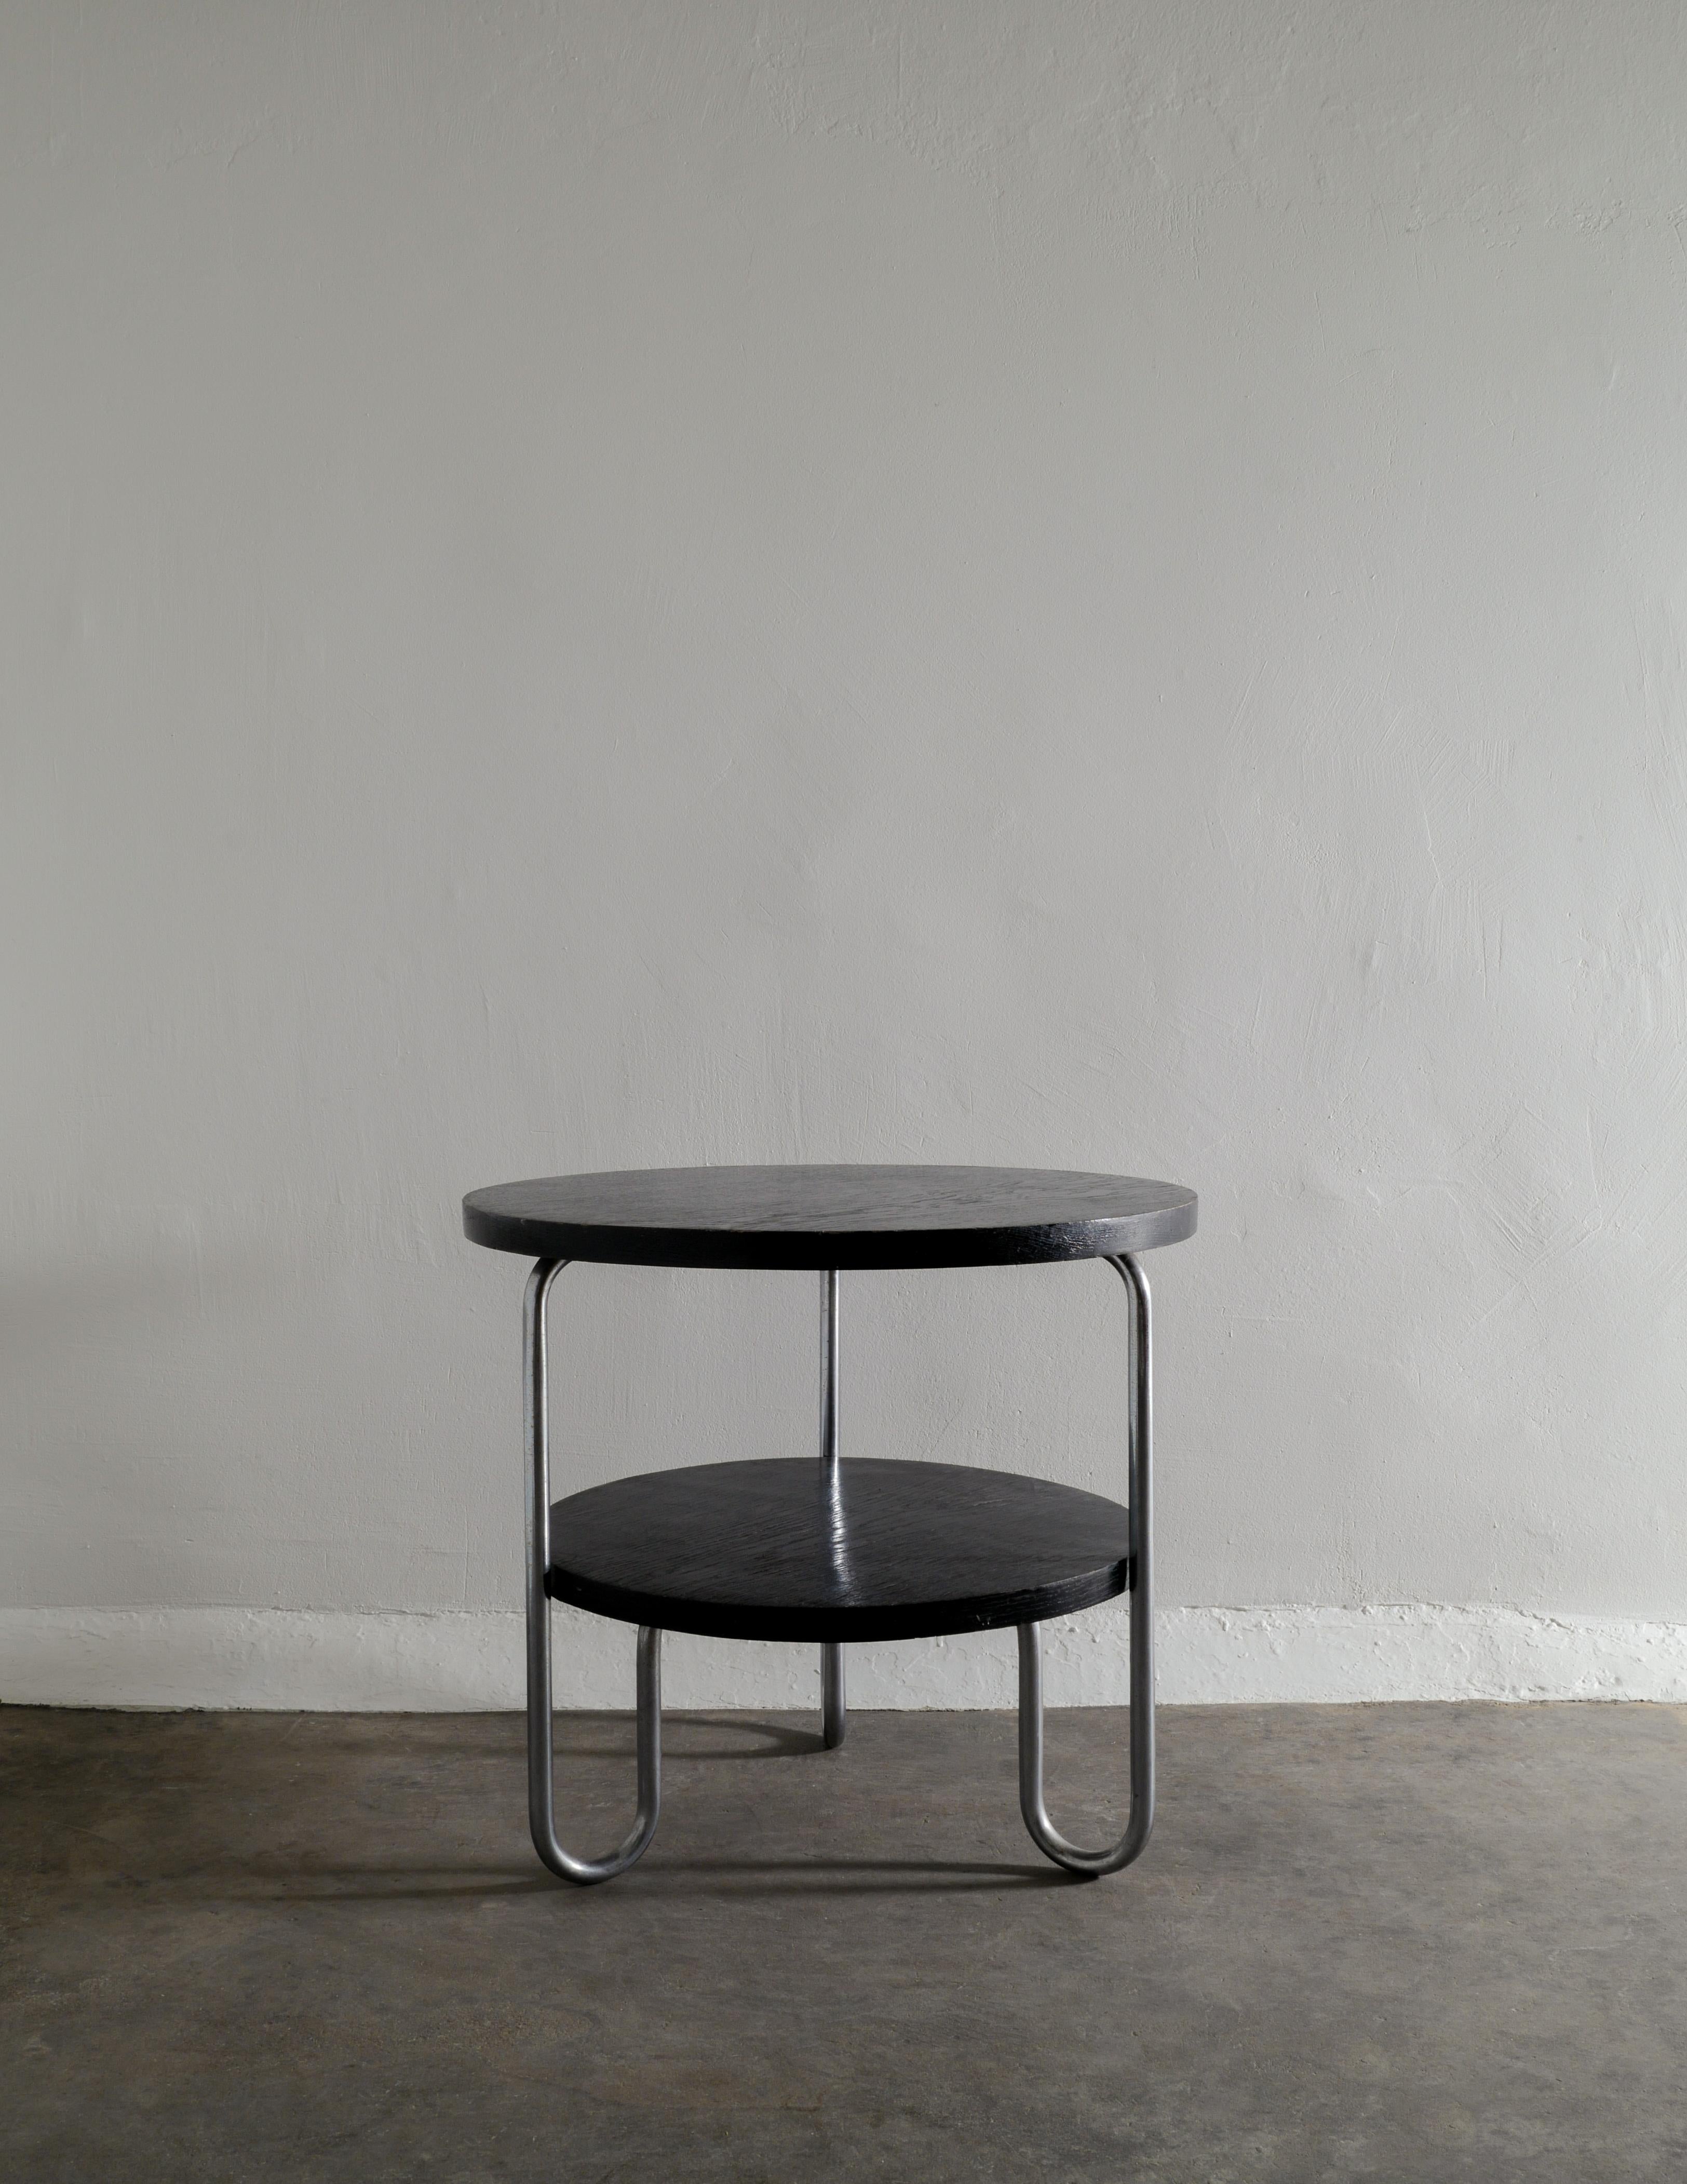 Rare round side coffee table designed by Mauser Werke Waldeck in an iconic Bauhaus style produced in the 1940s. In good vintage and original condition with small signs from age in use. Beautiful and genuine patina on the tubular legs.